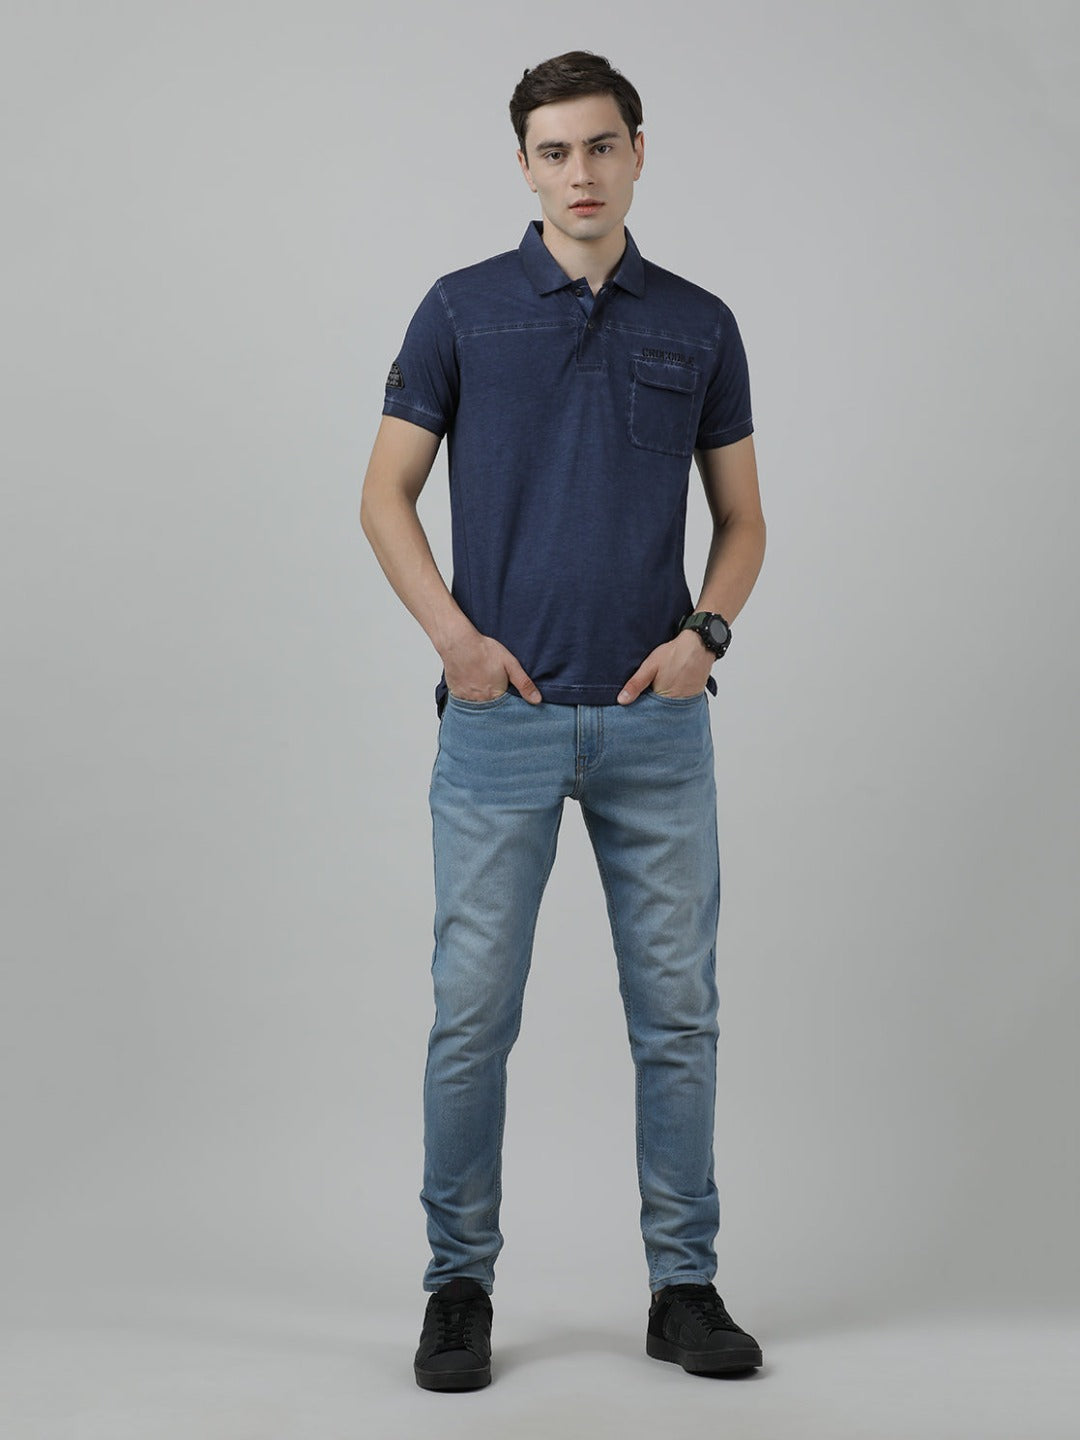 Crocodile Casual Blue T-Shirt Half Sleeve Slim Fit with Collar for Men